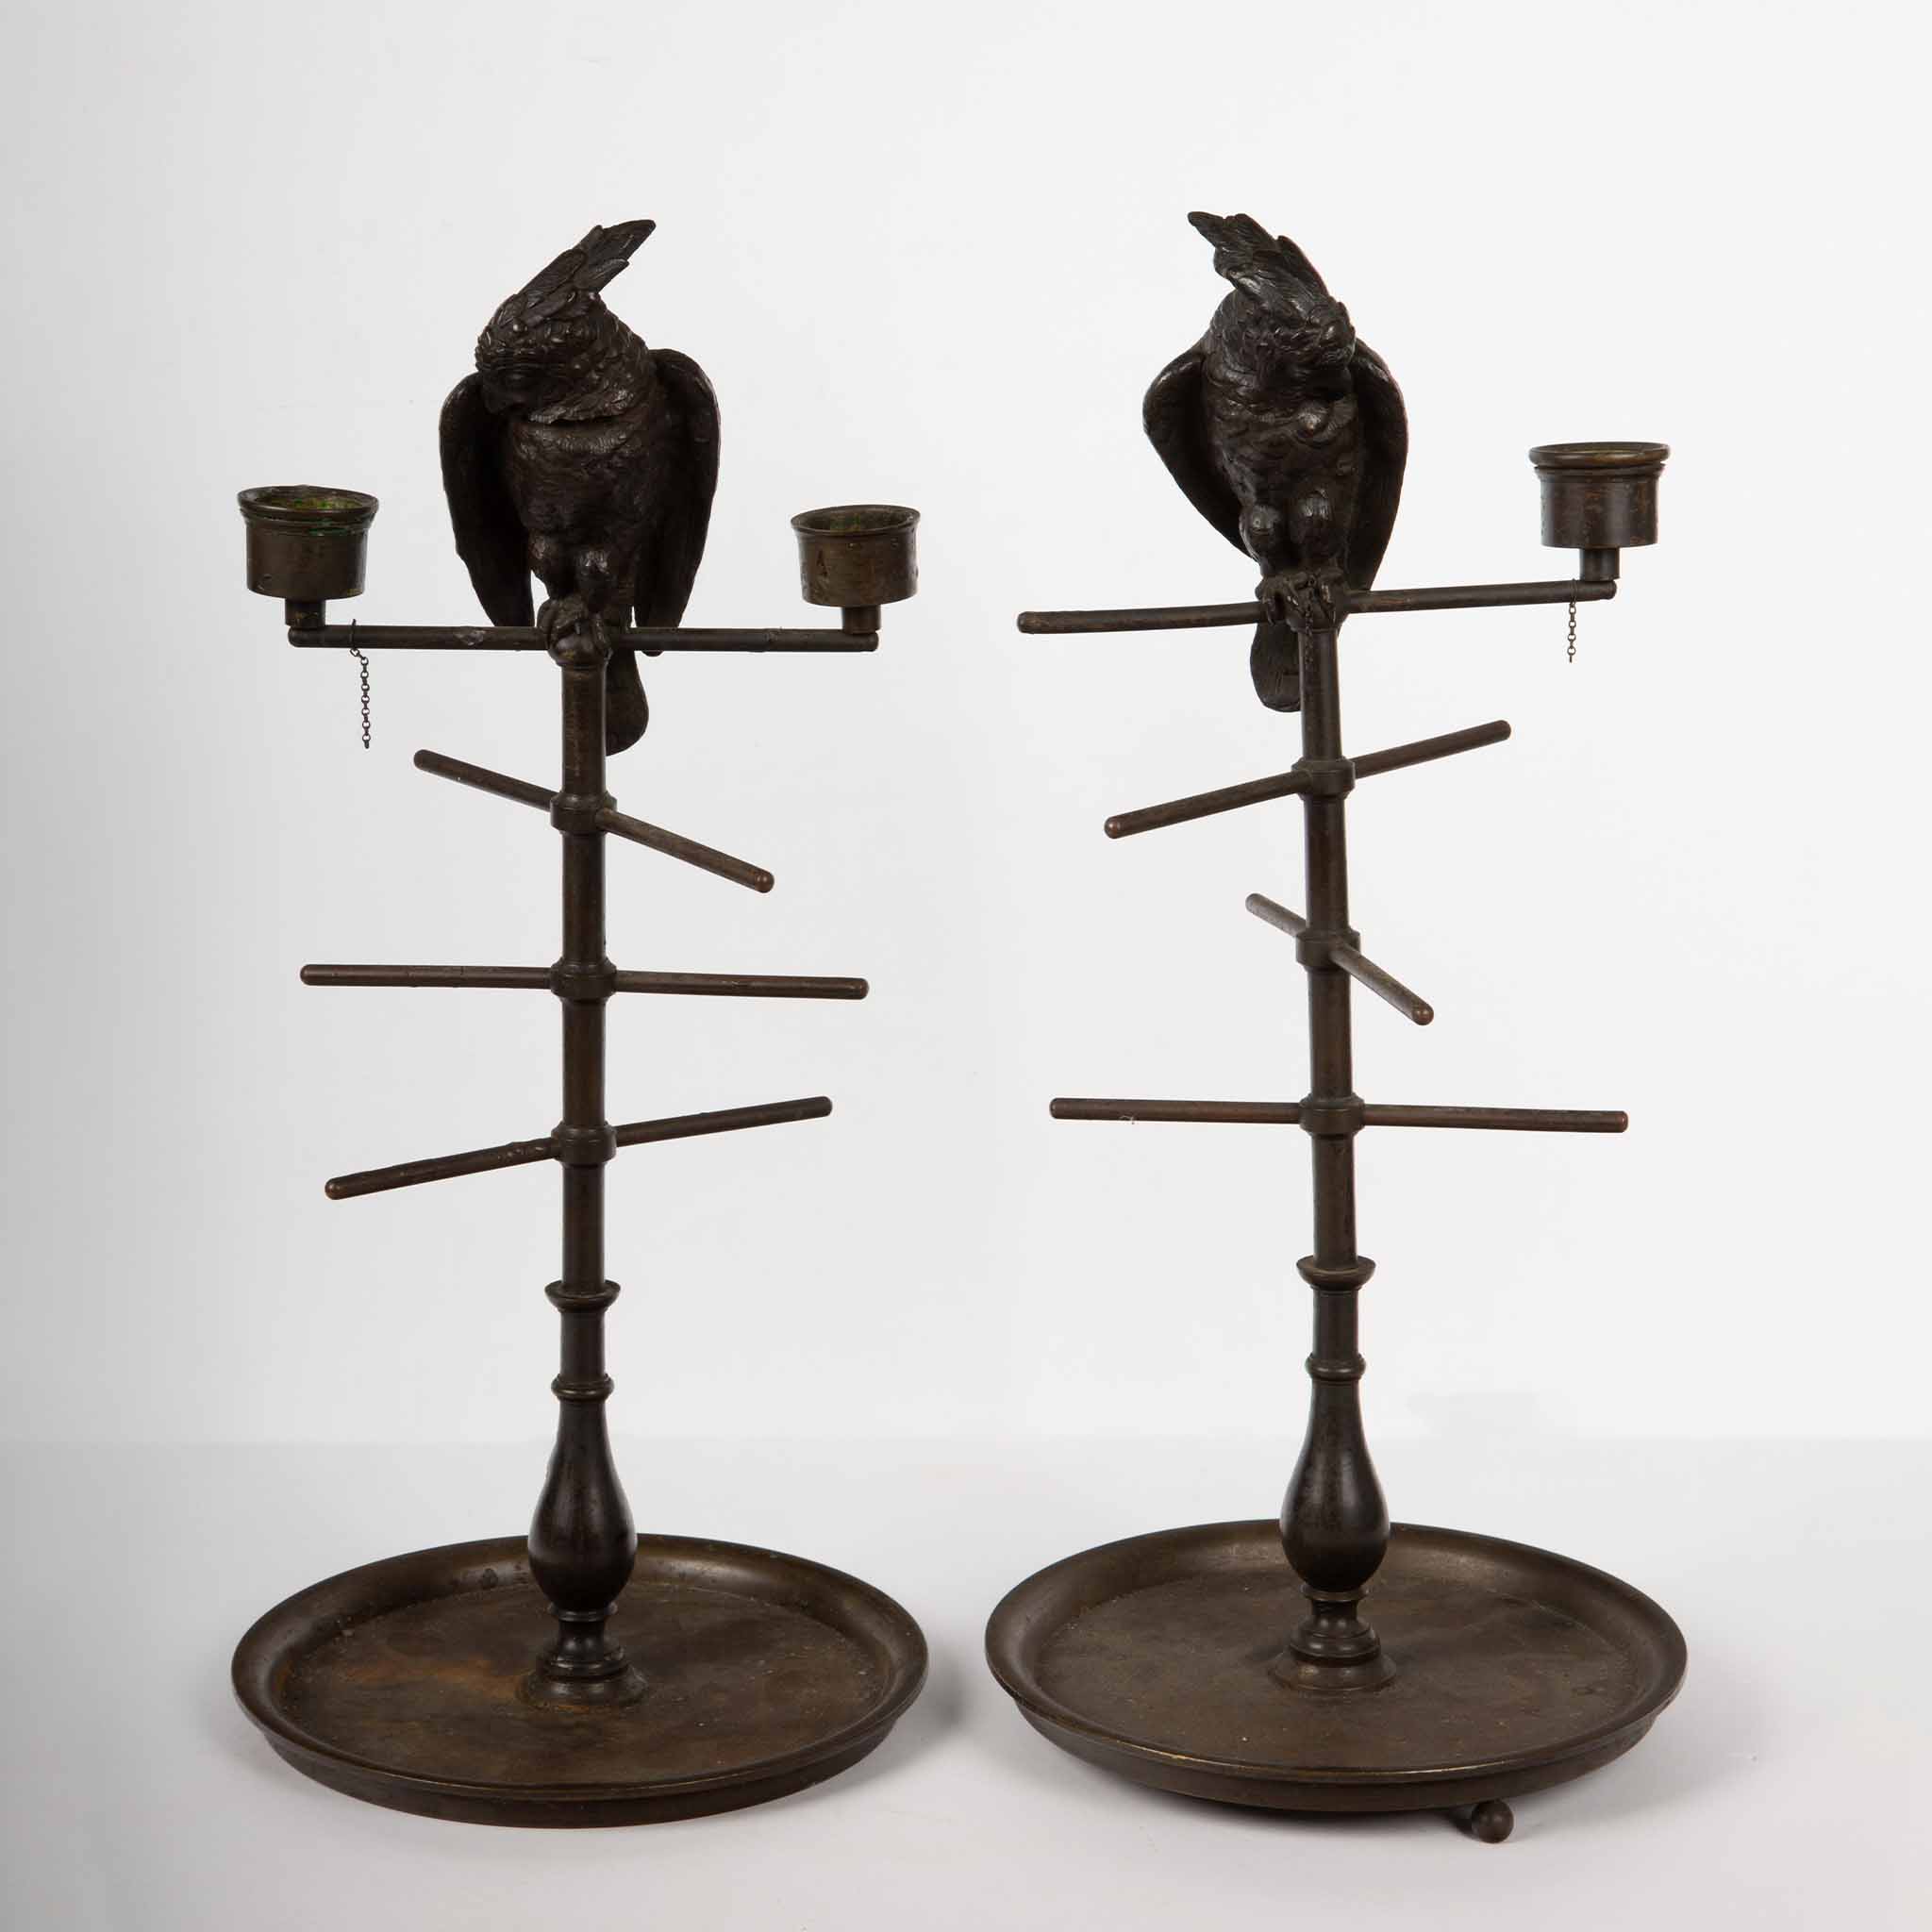 Whimsical 19th Century Parakeet Perch Inkwells: Ink 'n' Perch Delight!